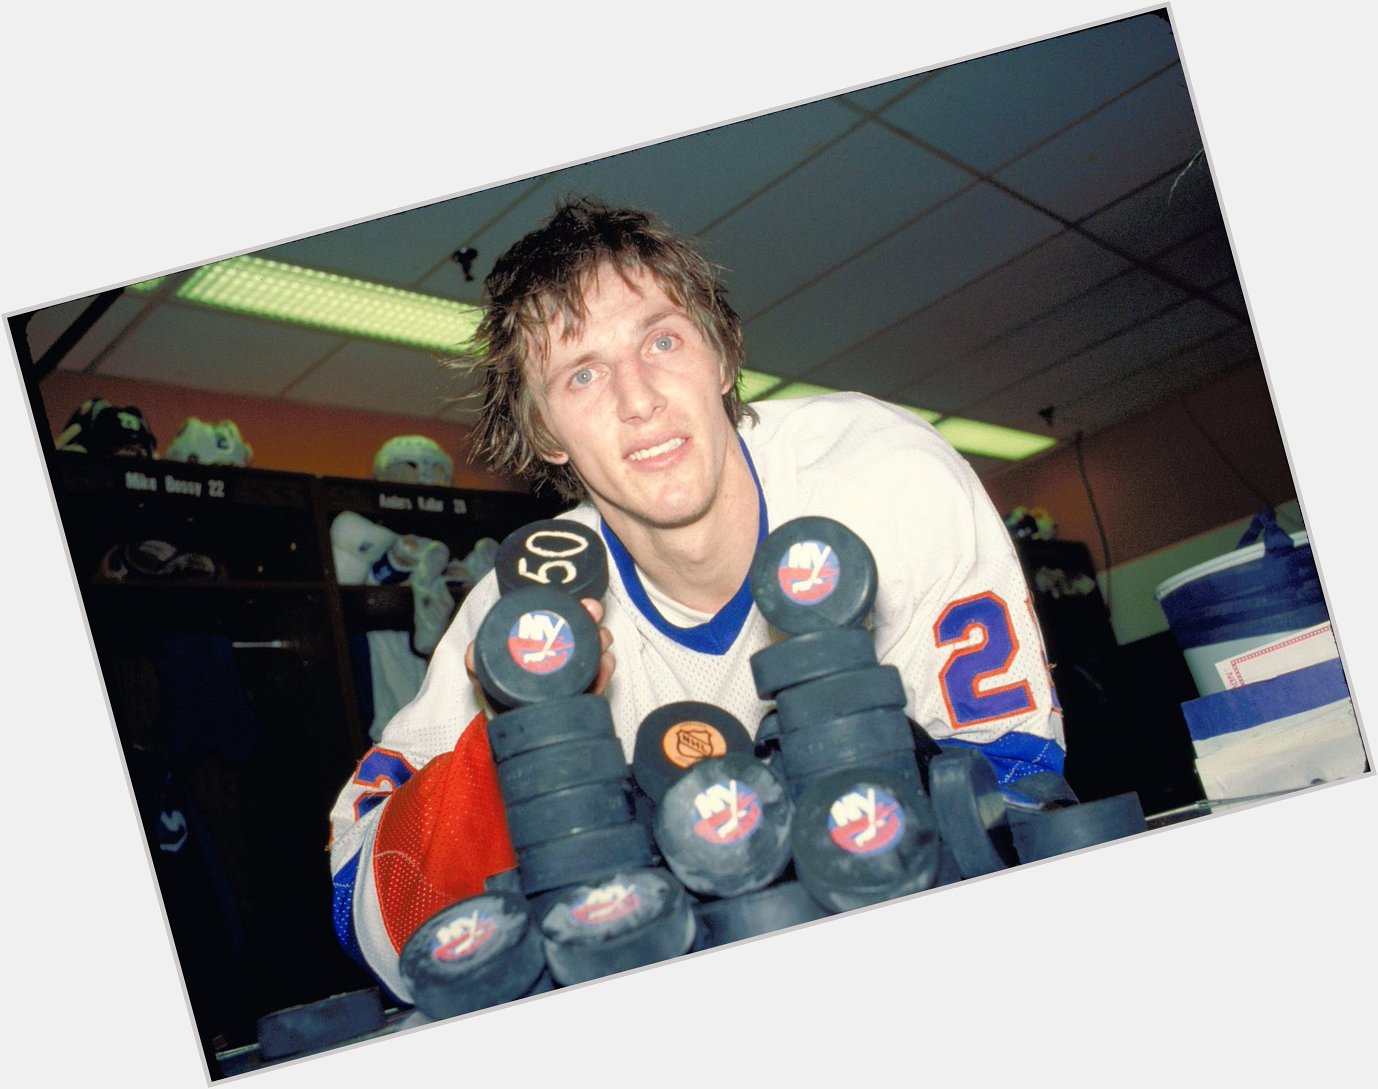 Happy Birthday Mike Bossy Mr. 50 in 50. Hope you have a great one you Isles legend! 